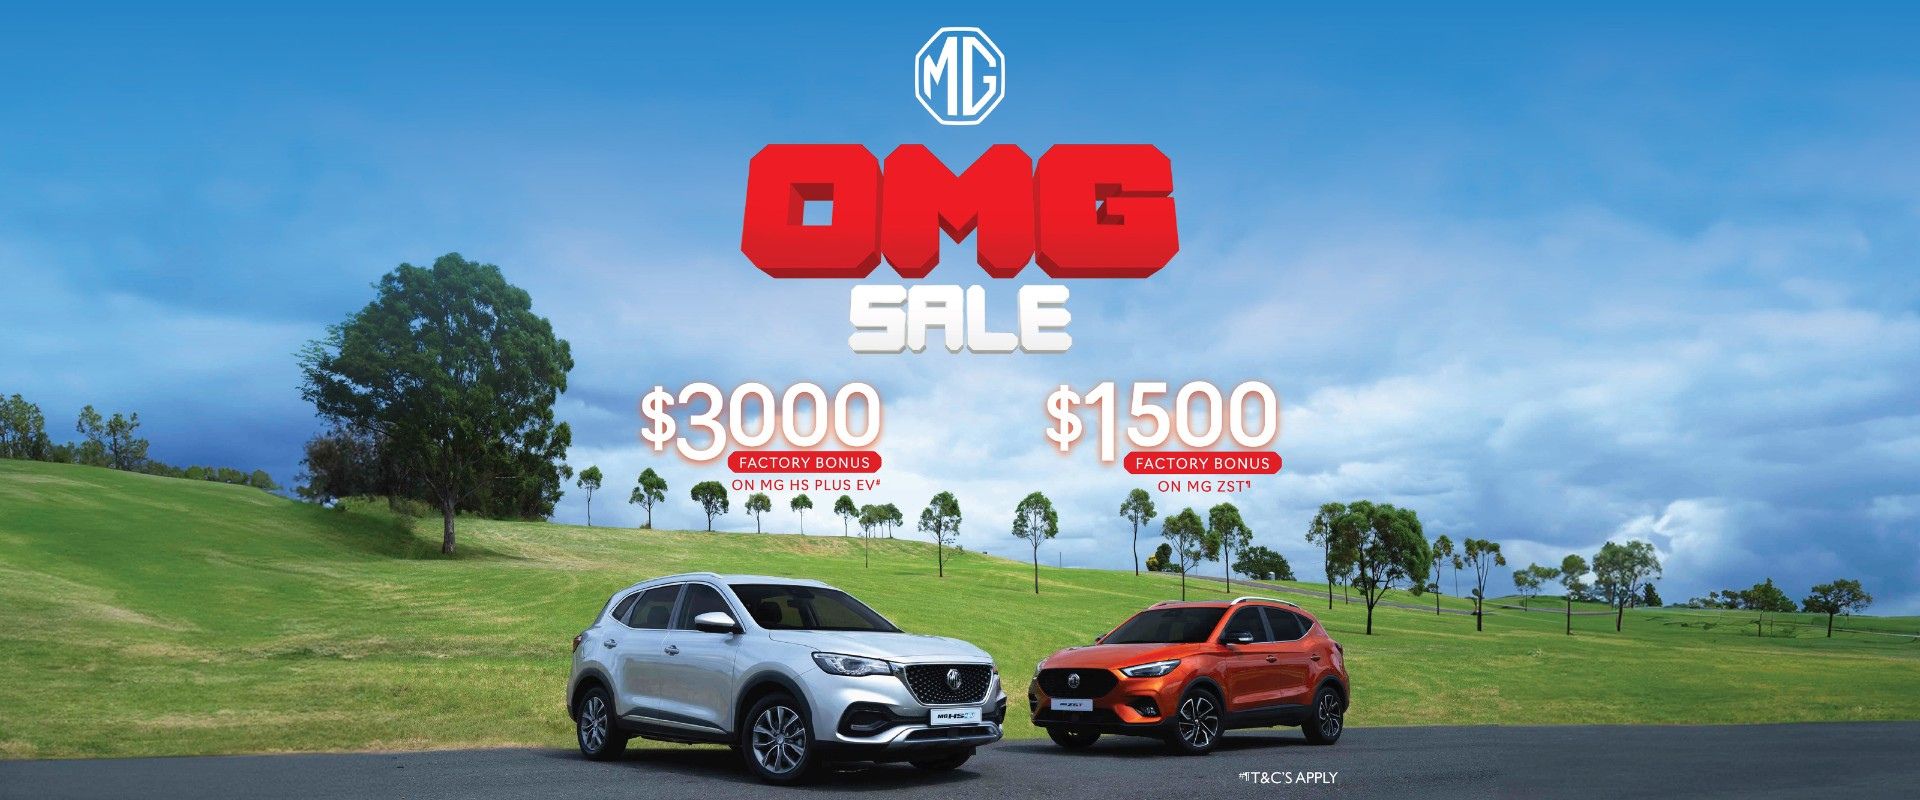 The OMG Sale is on now.